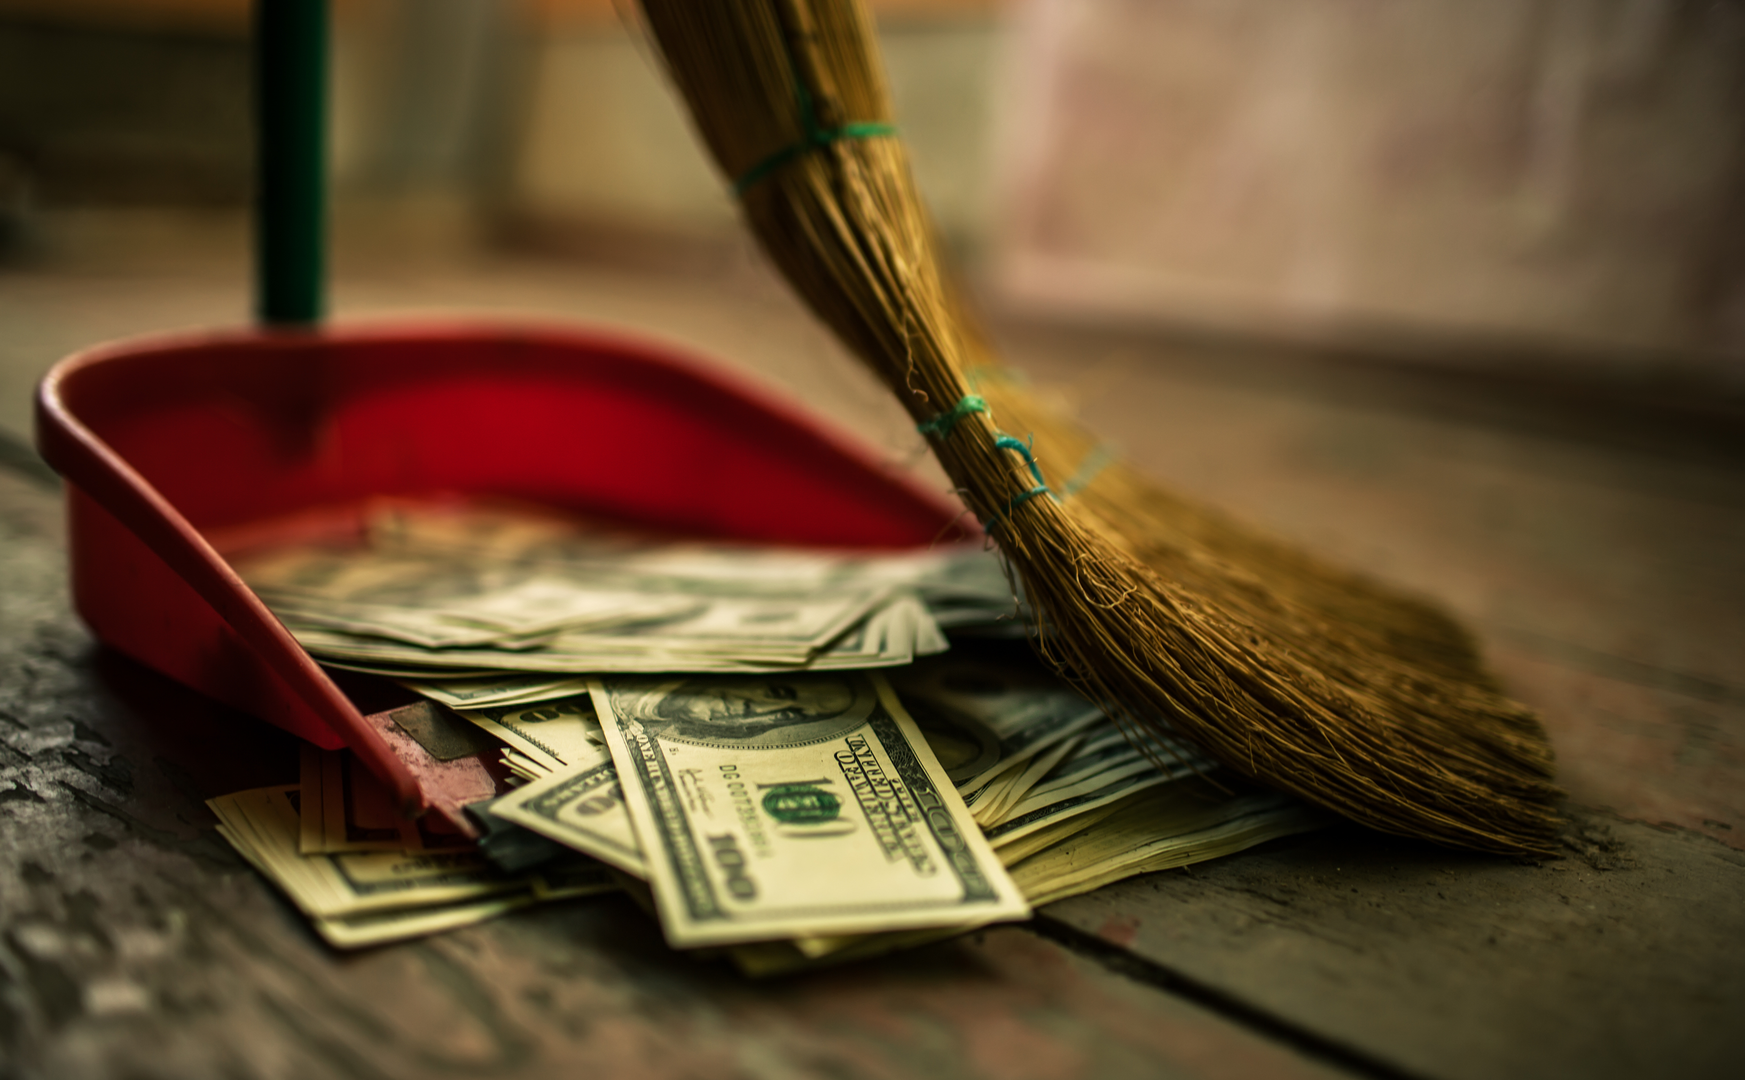 Someone using a broom to sweep dollar bills into a dust pan